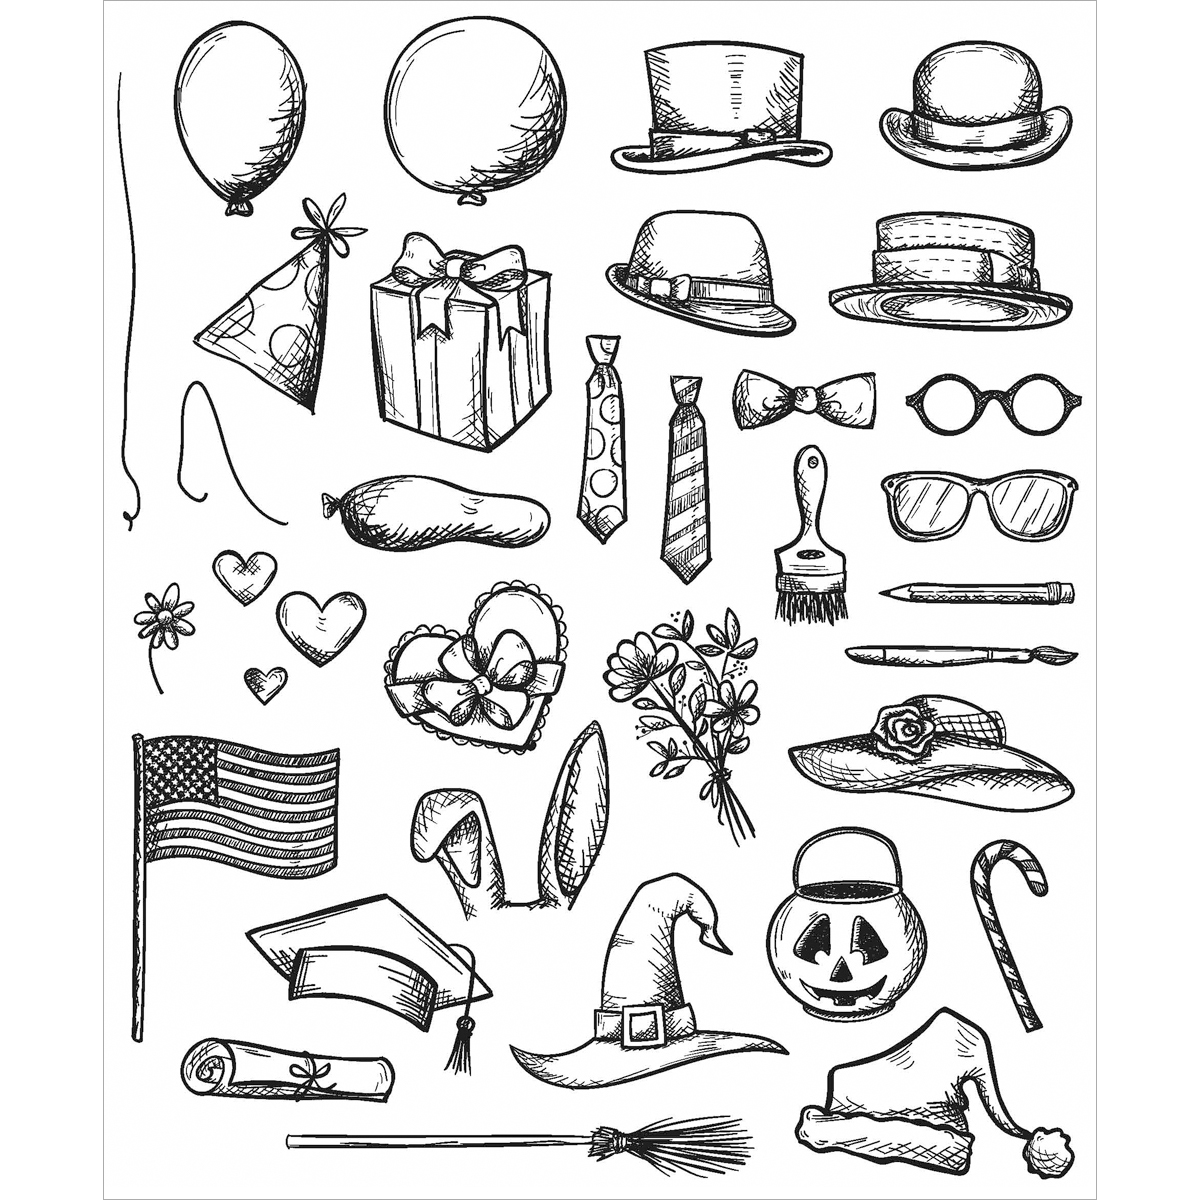 Stampers Anonymous Tim Holtz Cling Rubber Stamp Set 7 By 8 5 Crazy